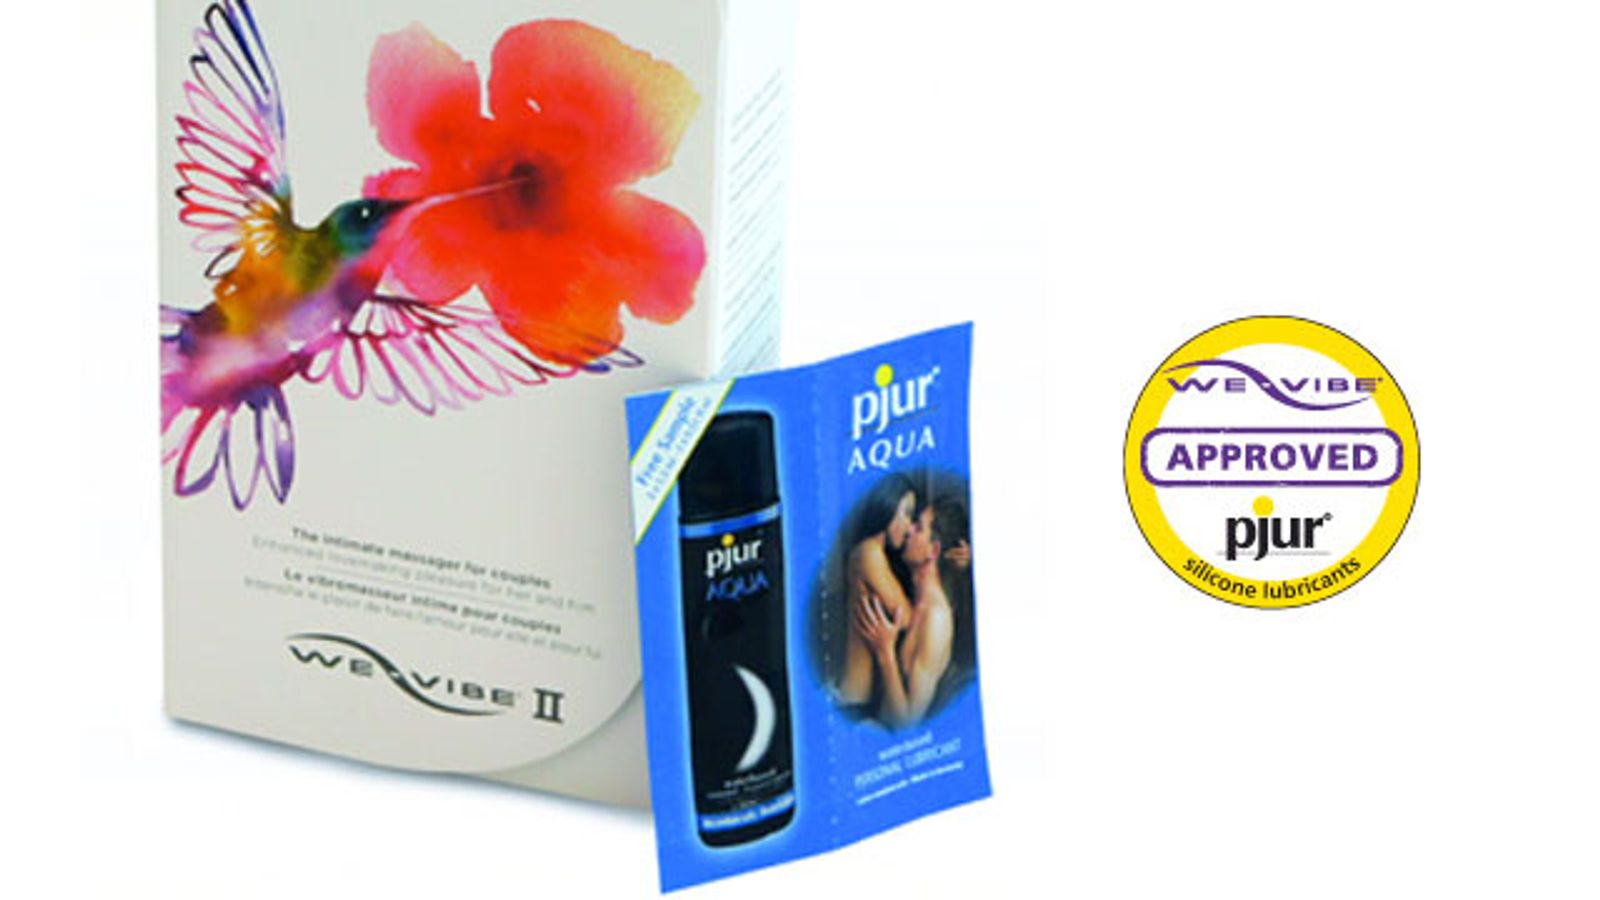 Pjur Lube Now Packaged With We-Vibe II